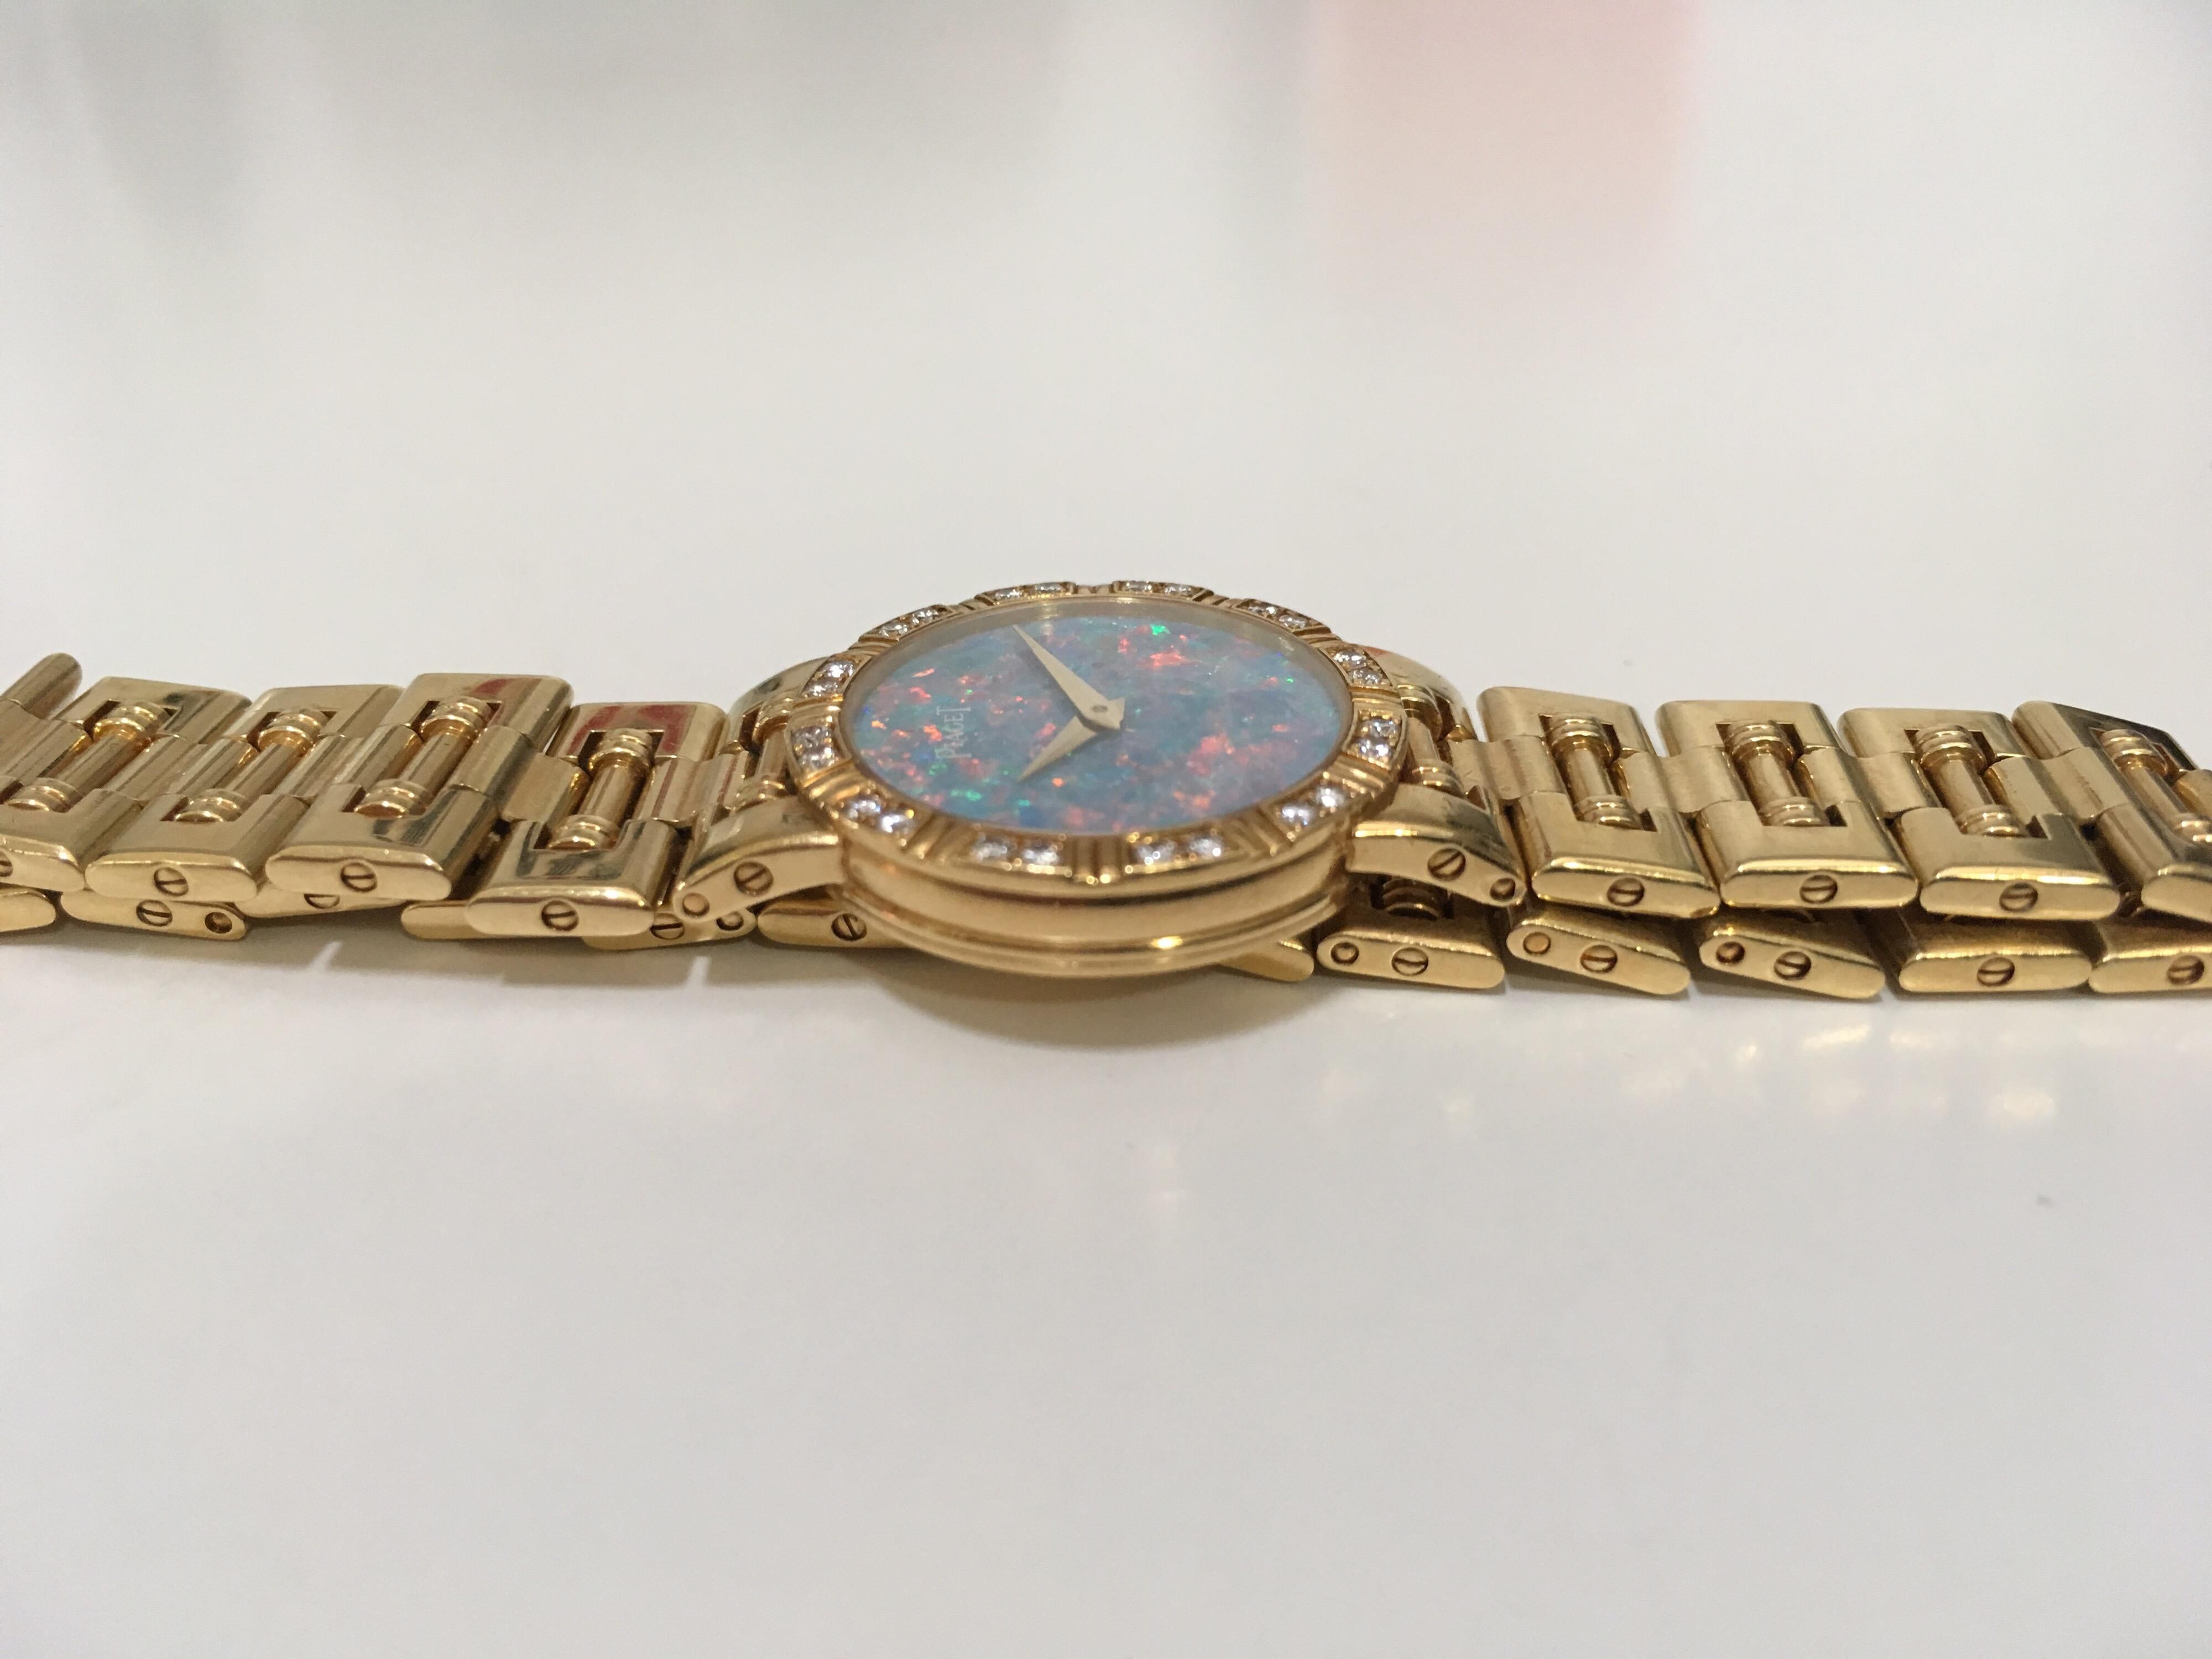 A ladies 18k Piaget Dancer watch with an 18K link bracelet and Opal face. The bezel measures 23mm and has been set with 24 rbc diamonds, measuring approximately 1mm each. This stunning understated watch, definitely makes a statement! The back is